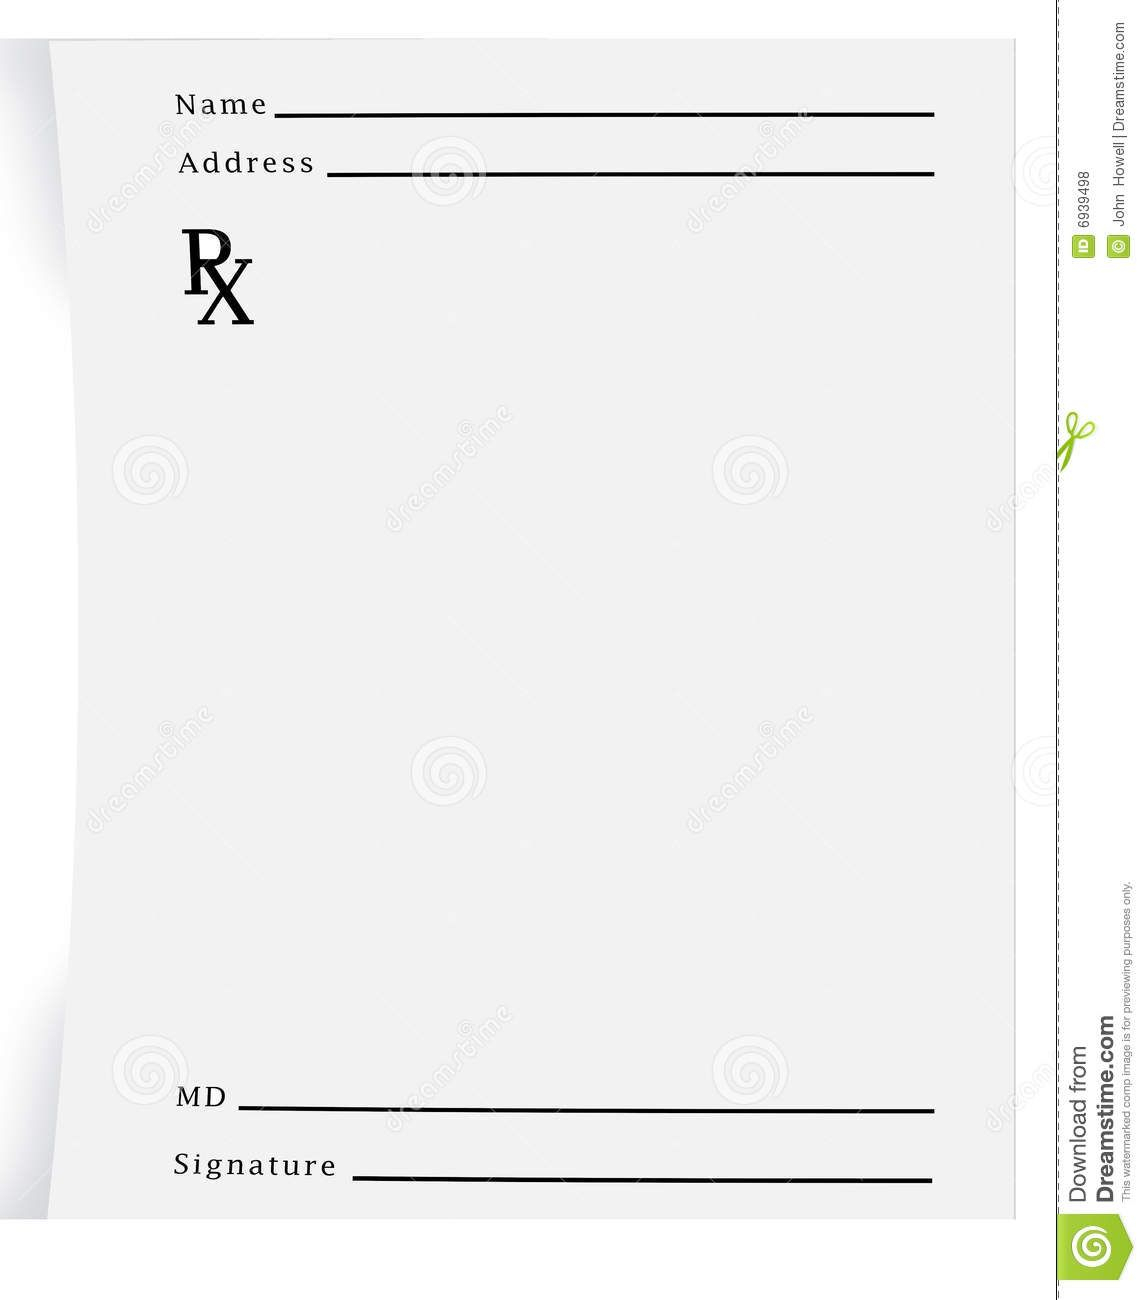 Prescription Pad Blank - Download From Over 27 Million High Throughout Blank Prescription Form Template